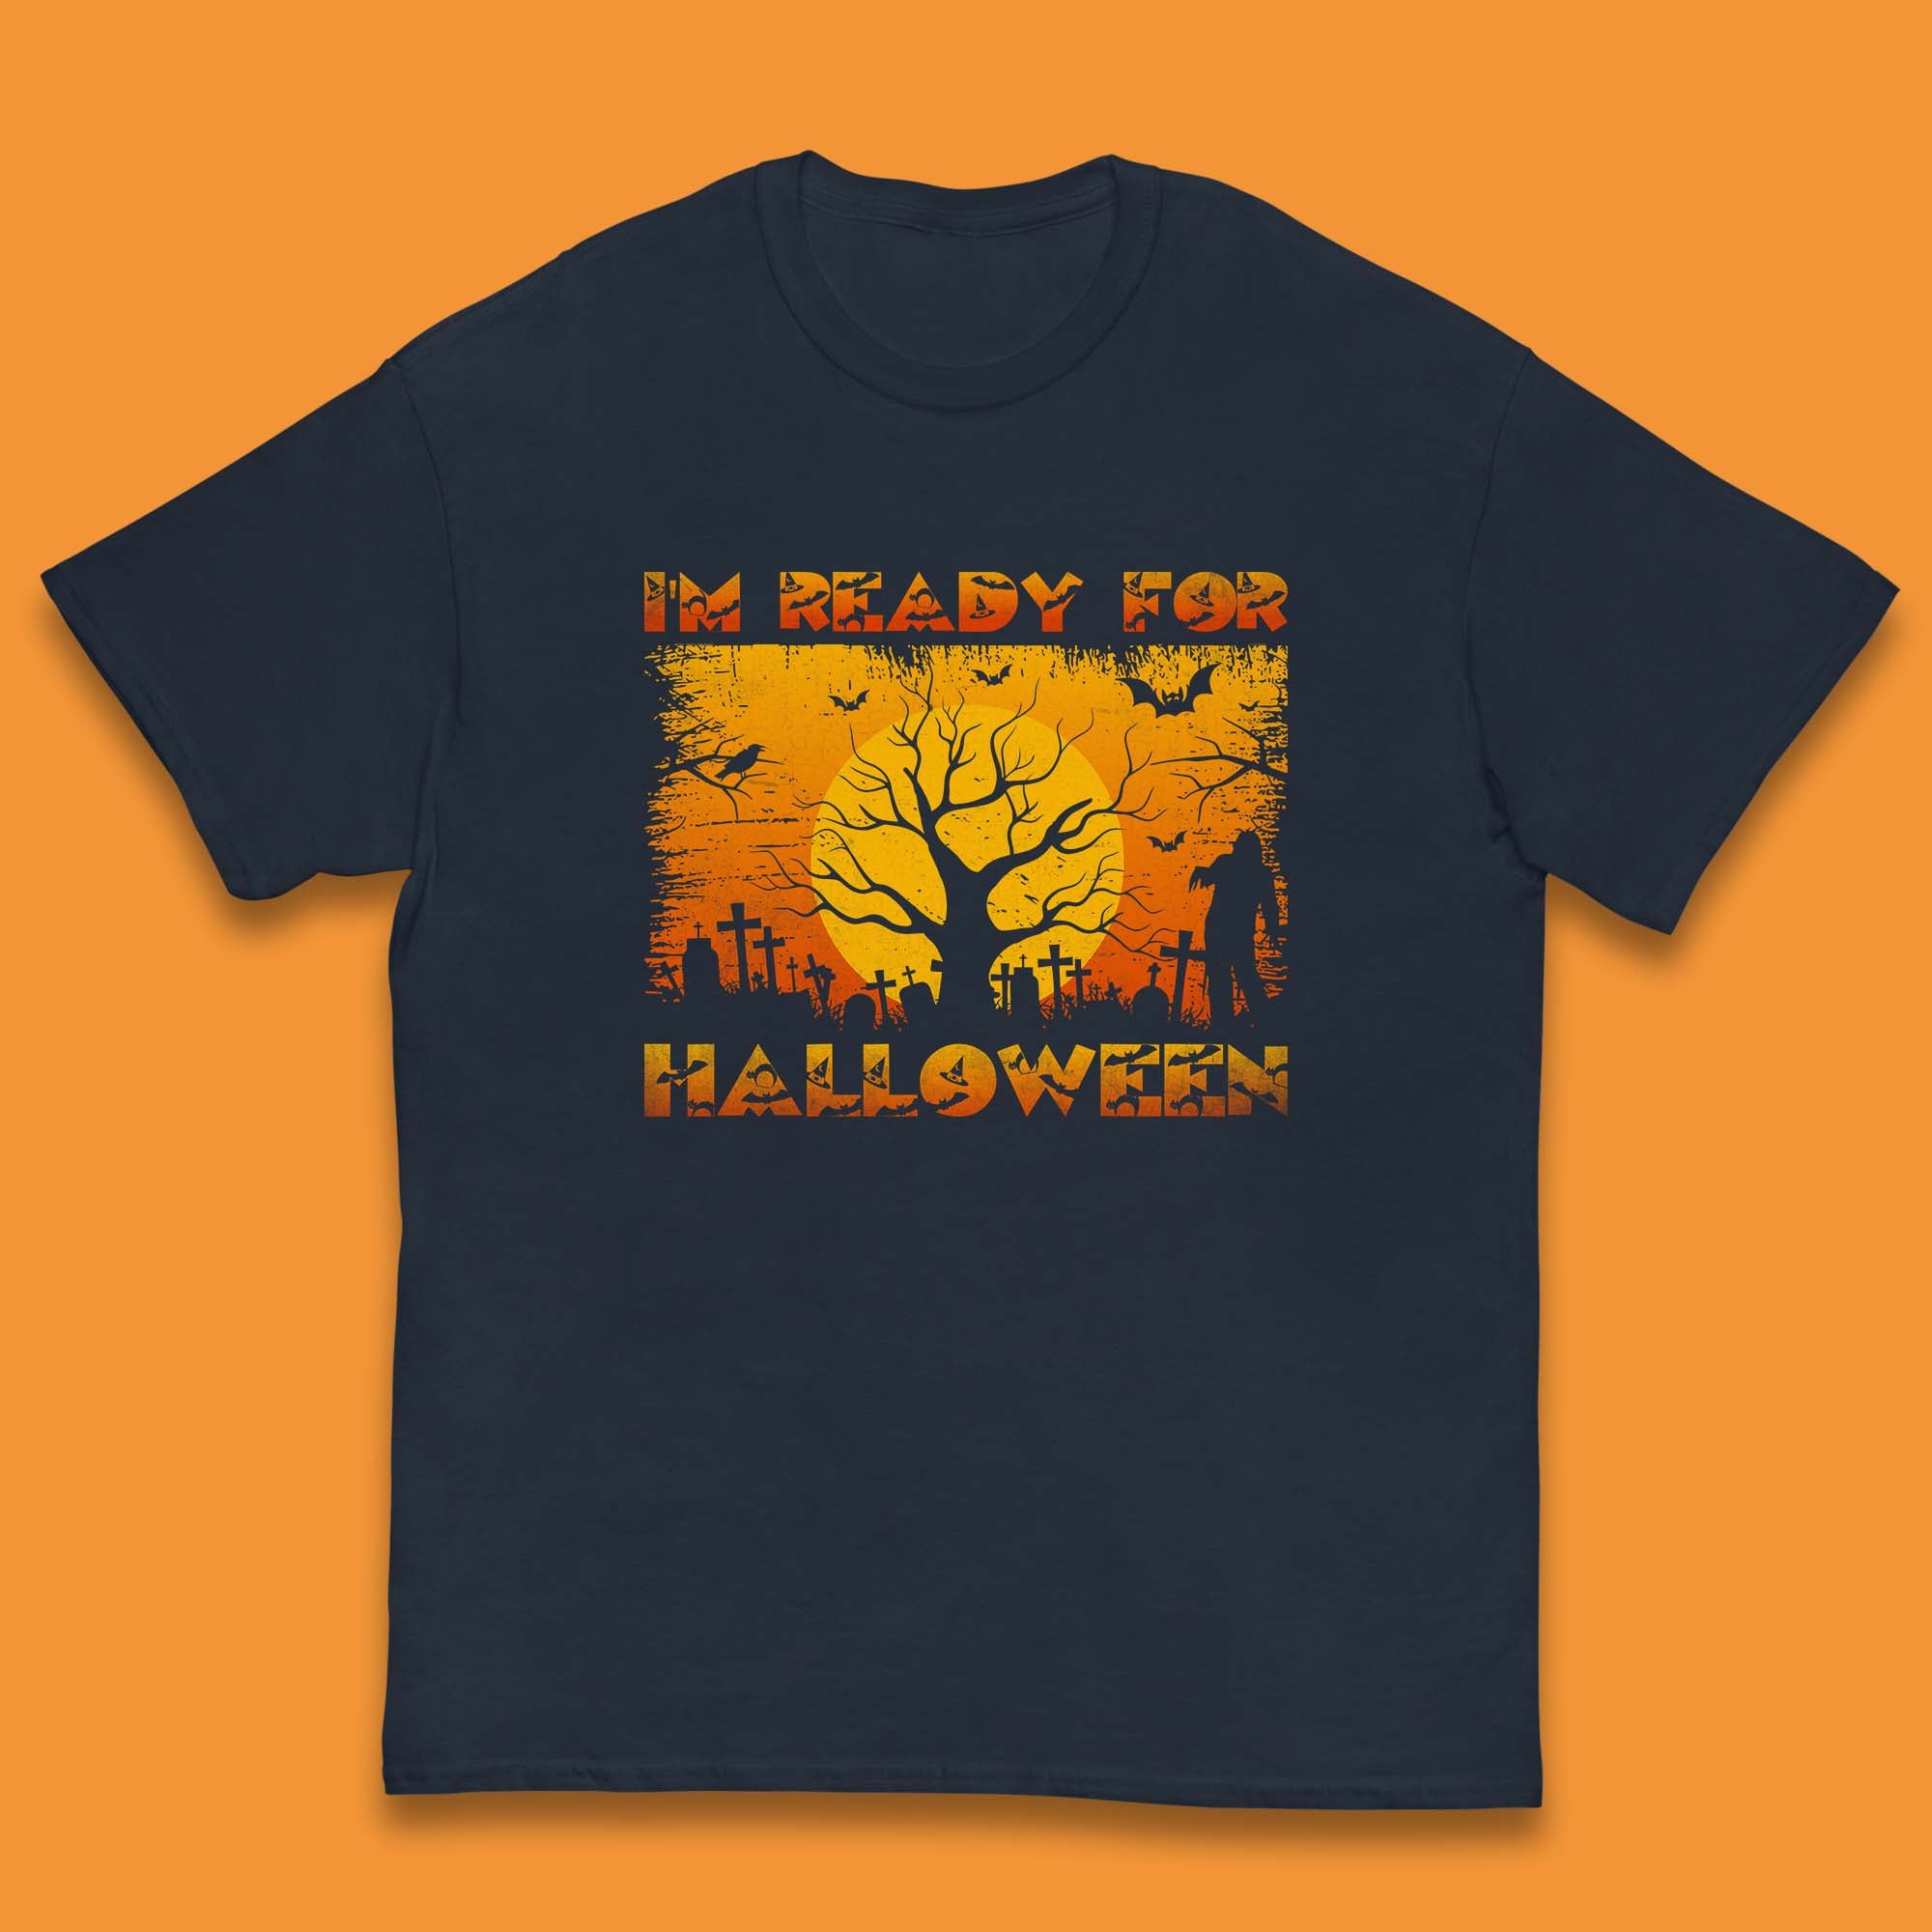 I'm Ready For Halloween Horror Scary Halloween Zombie Graveyards With Dead Tree Kids T Shirt